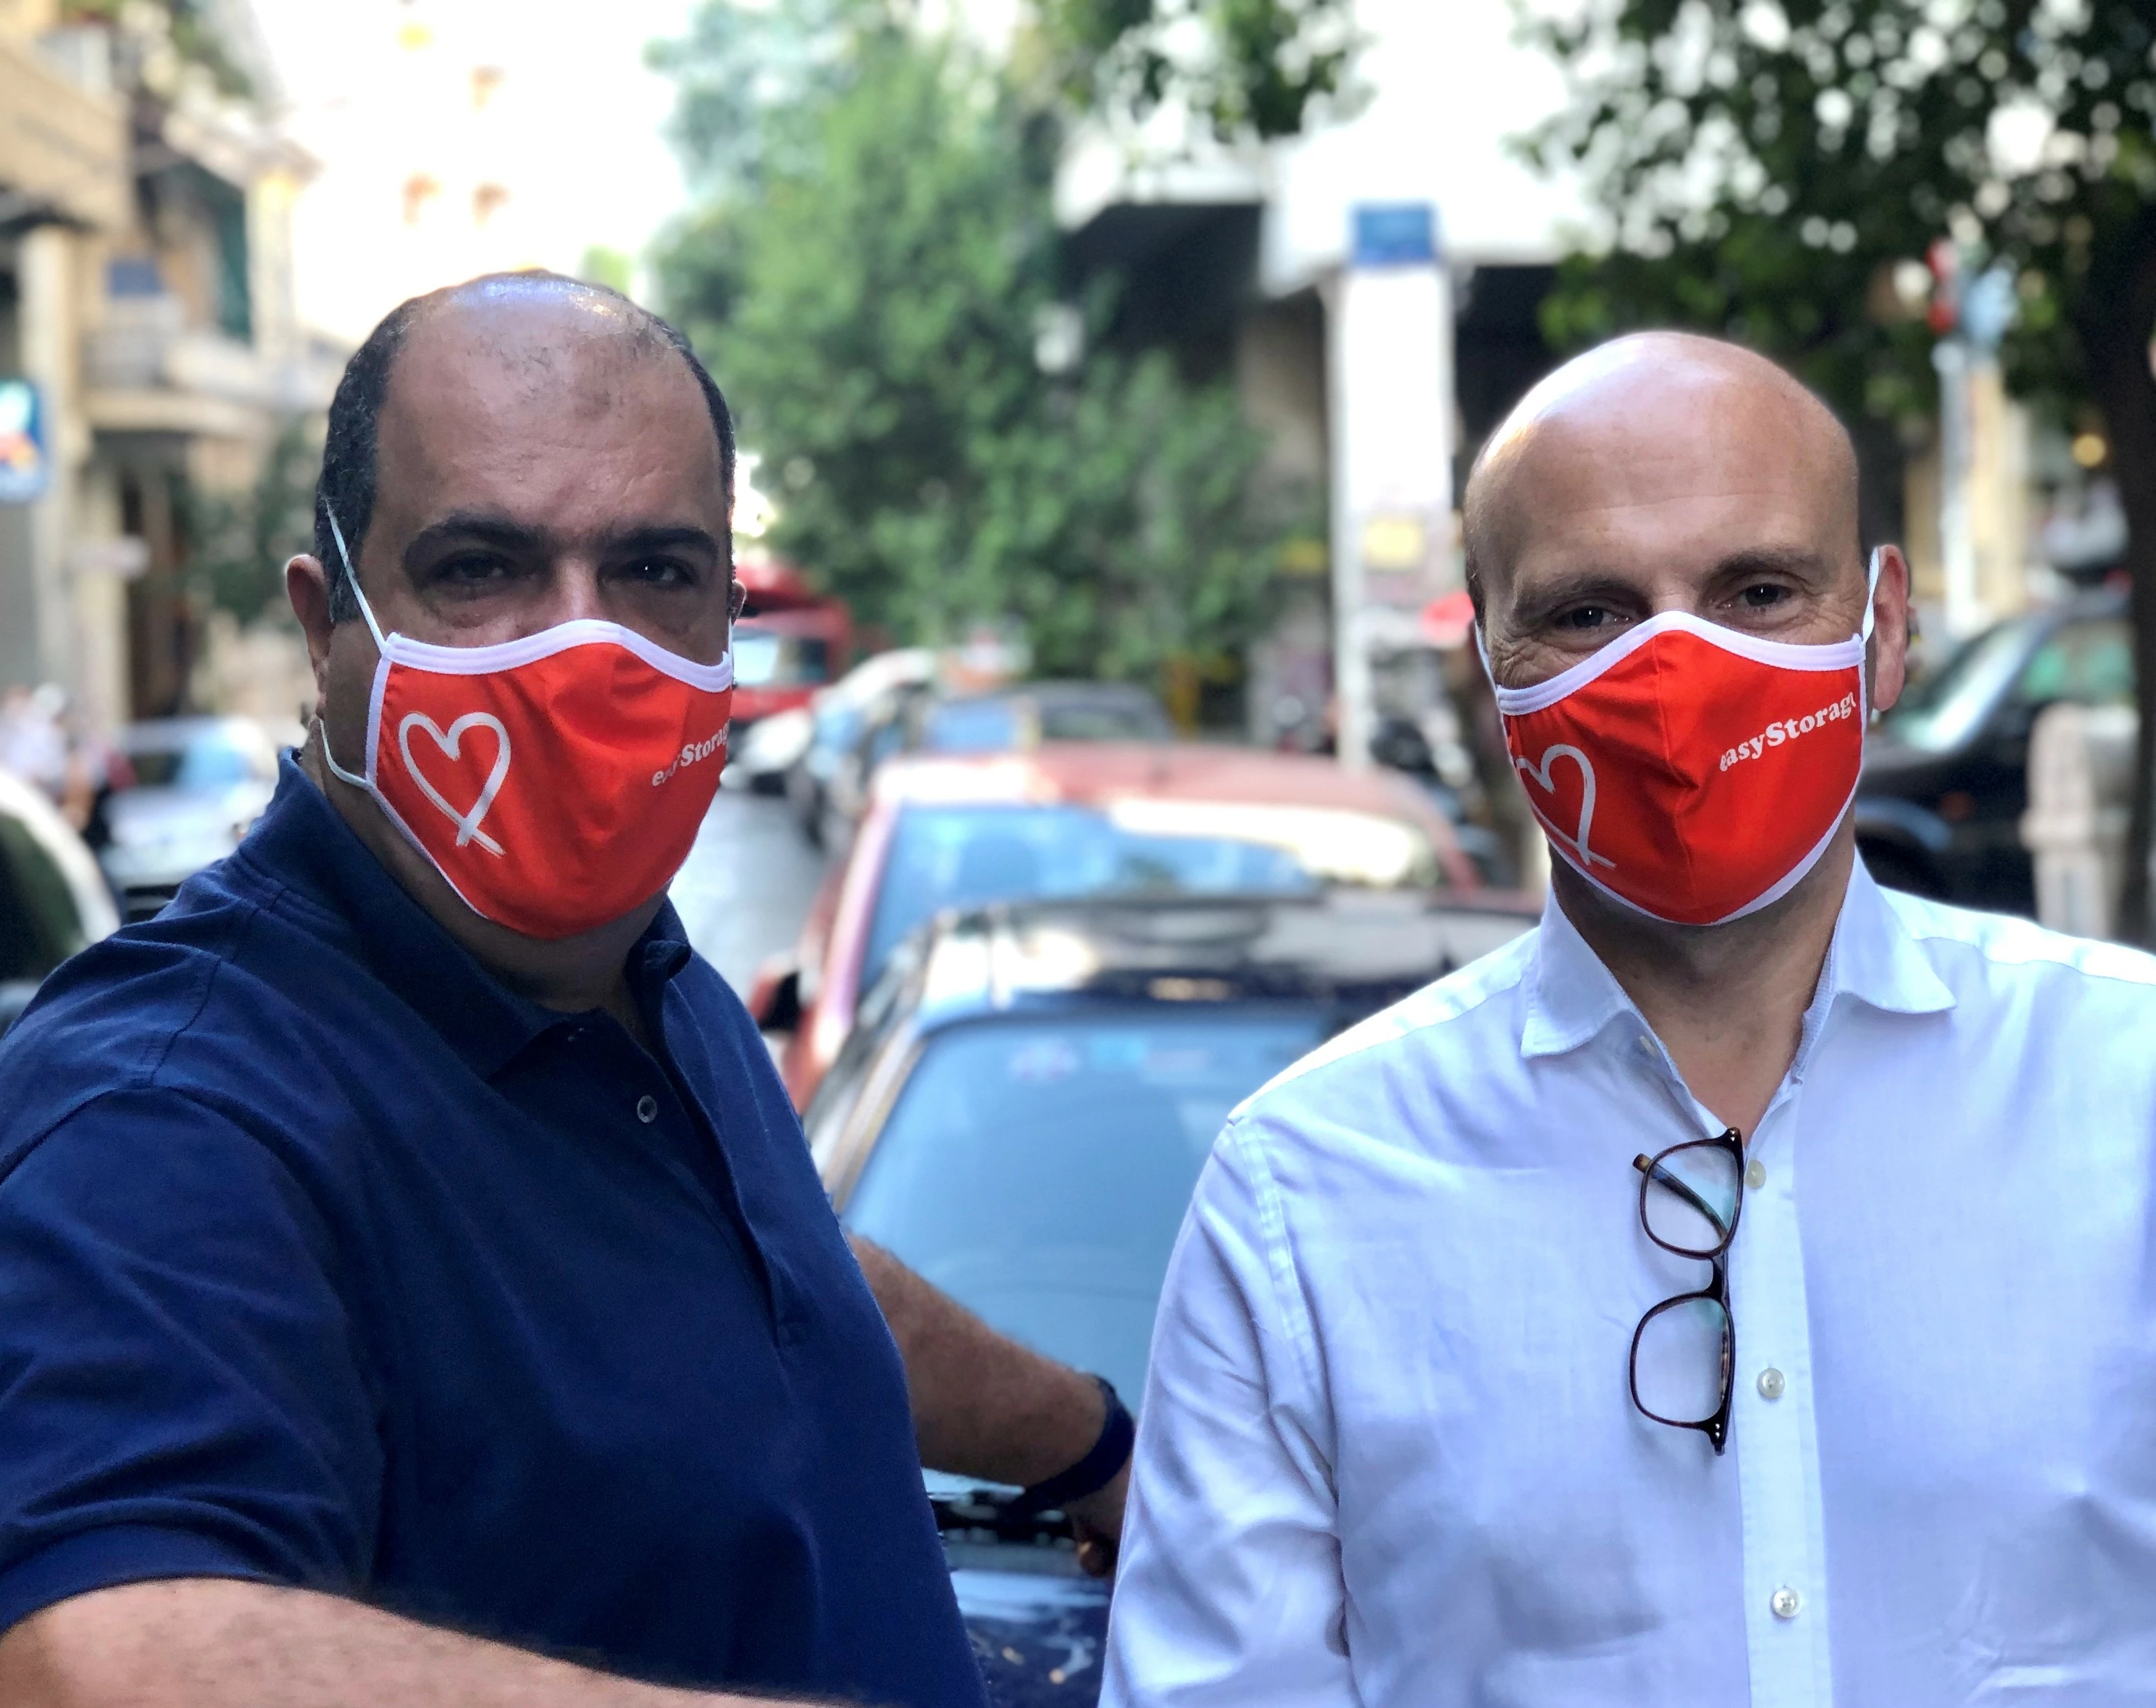 Sir Stelios Haji-Ioannou (L) and Tim Slesinger (R) visit Food from the Heart distribution centre in Athens